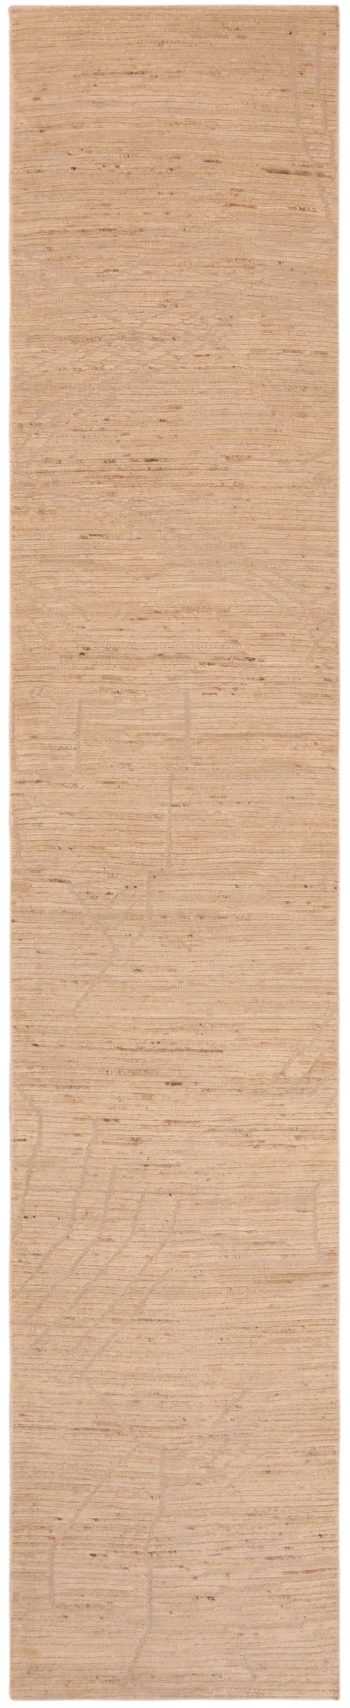 Modern Primitive Design Moroccan Style Runner 61101 by Nazmiyal Antique Rugs